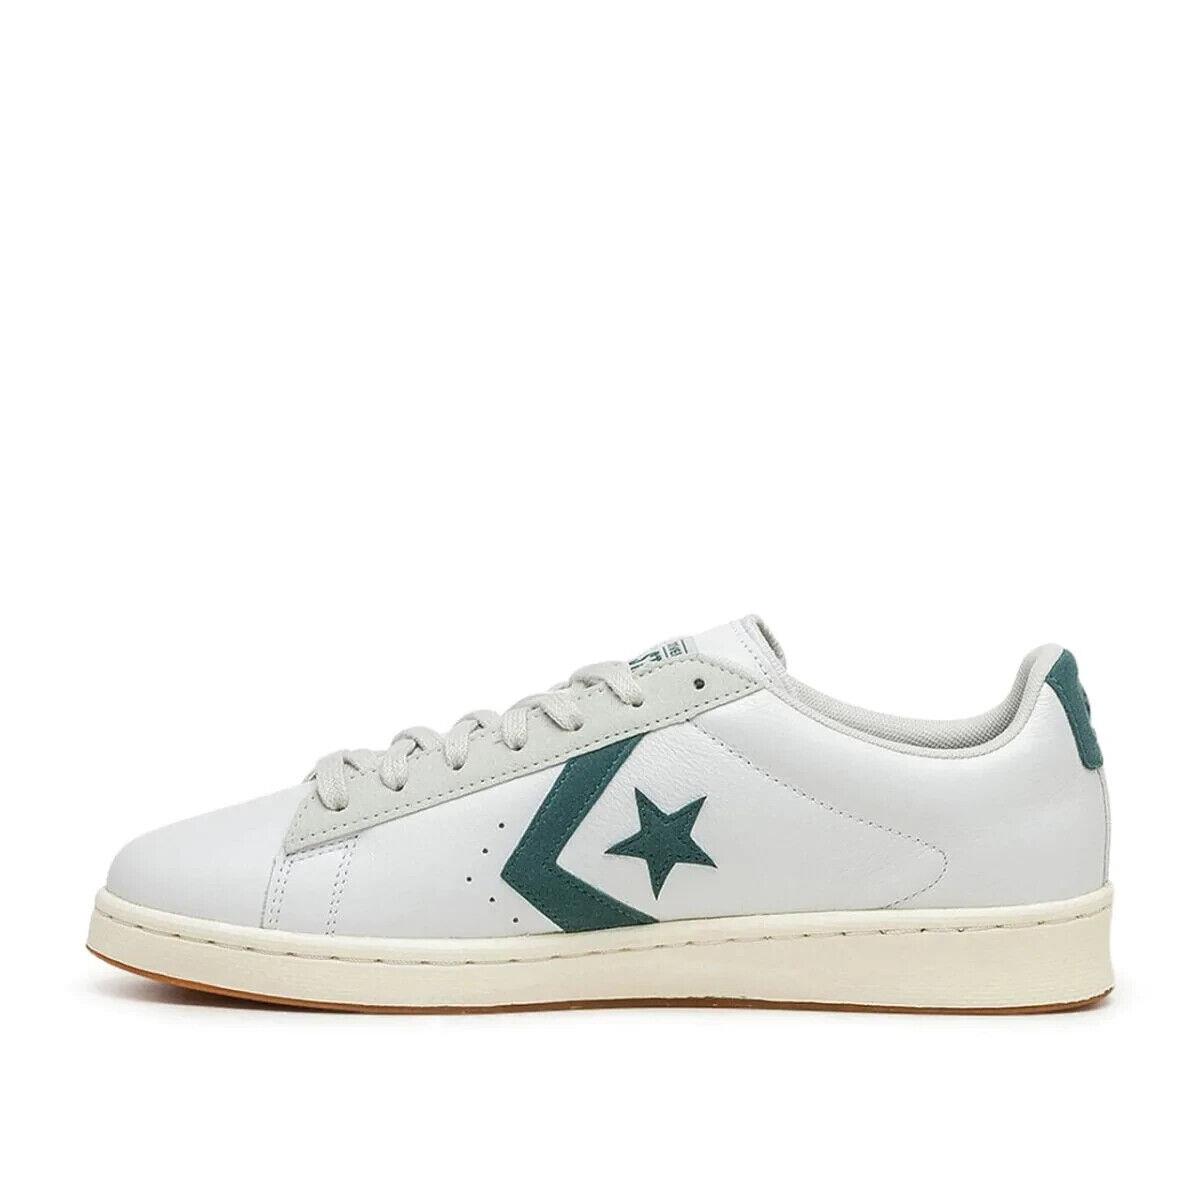 Converse shoes Pro Leather - White 2